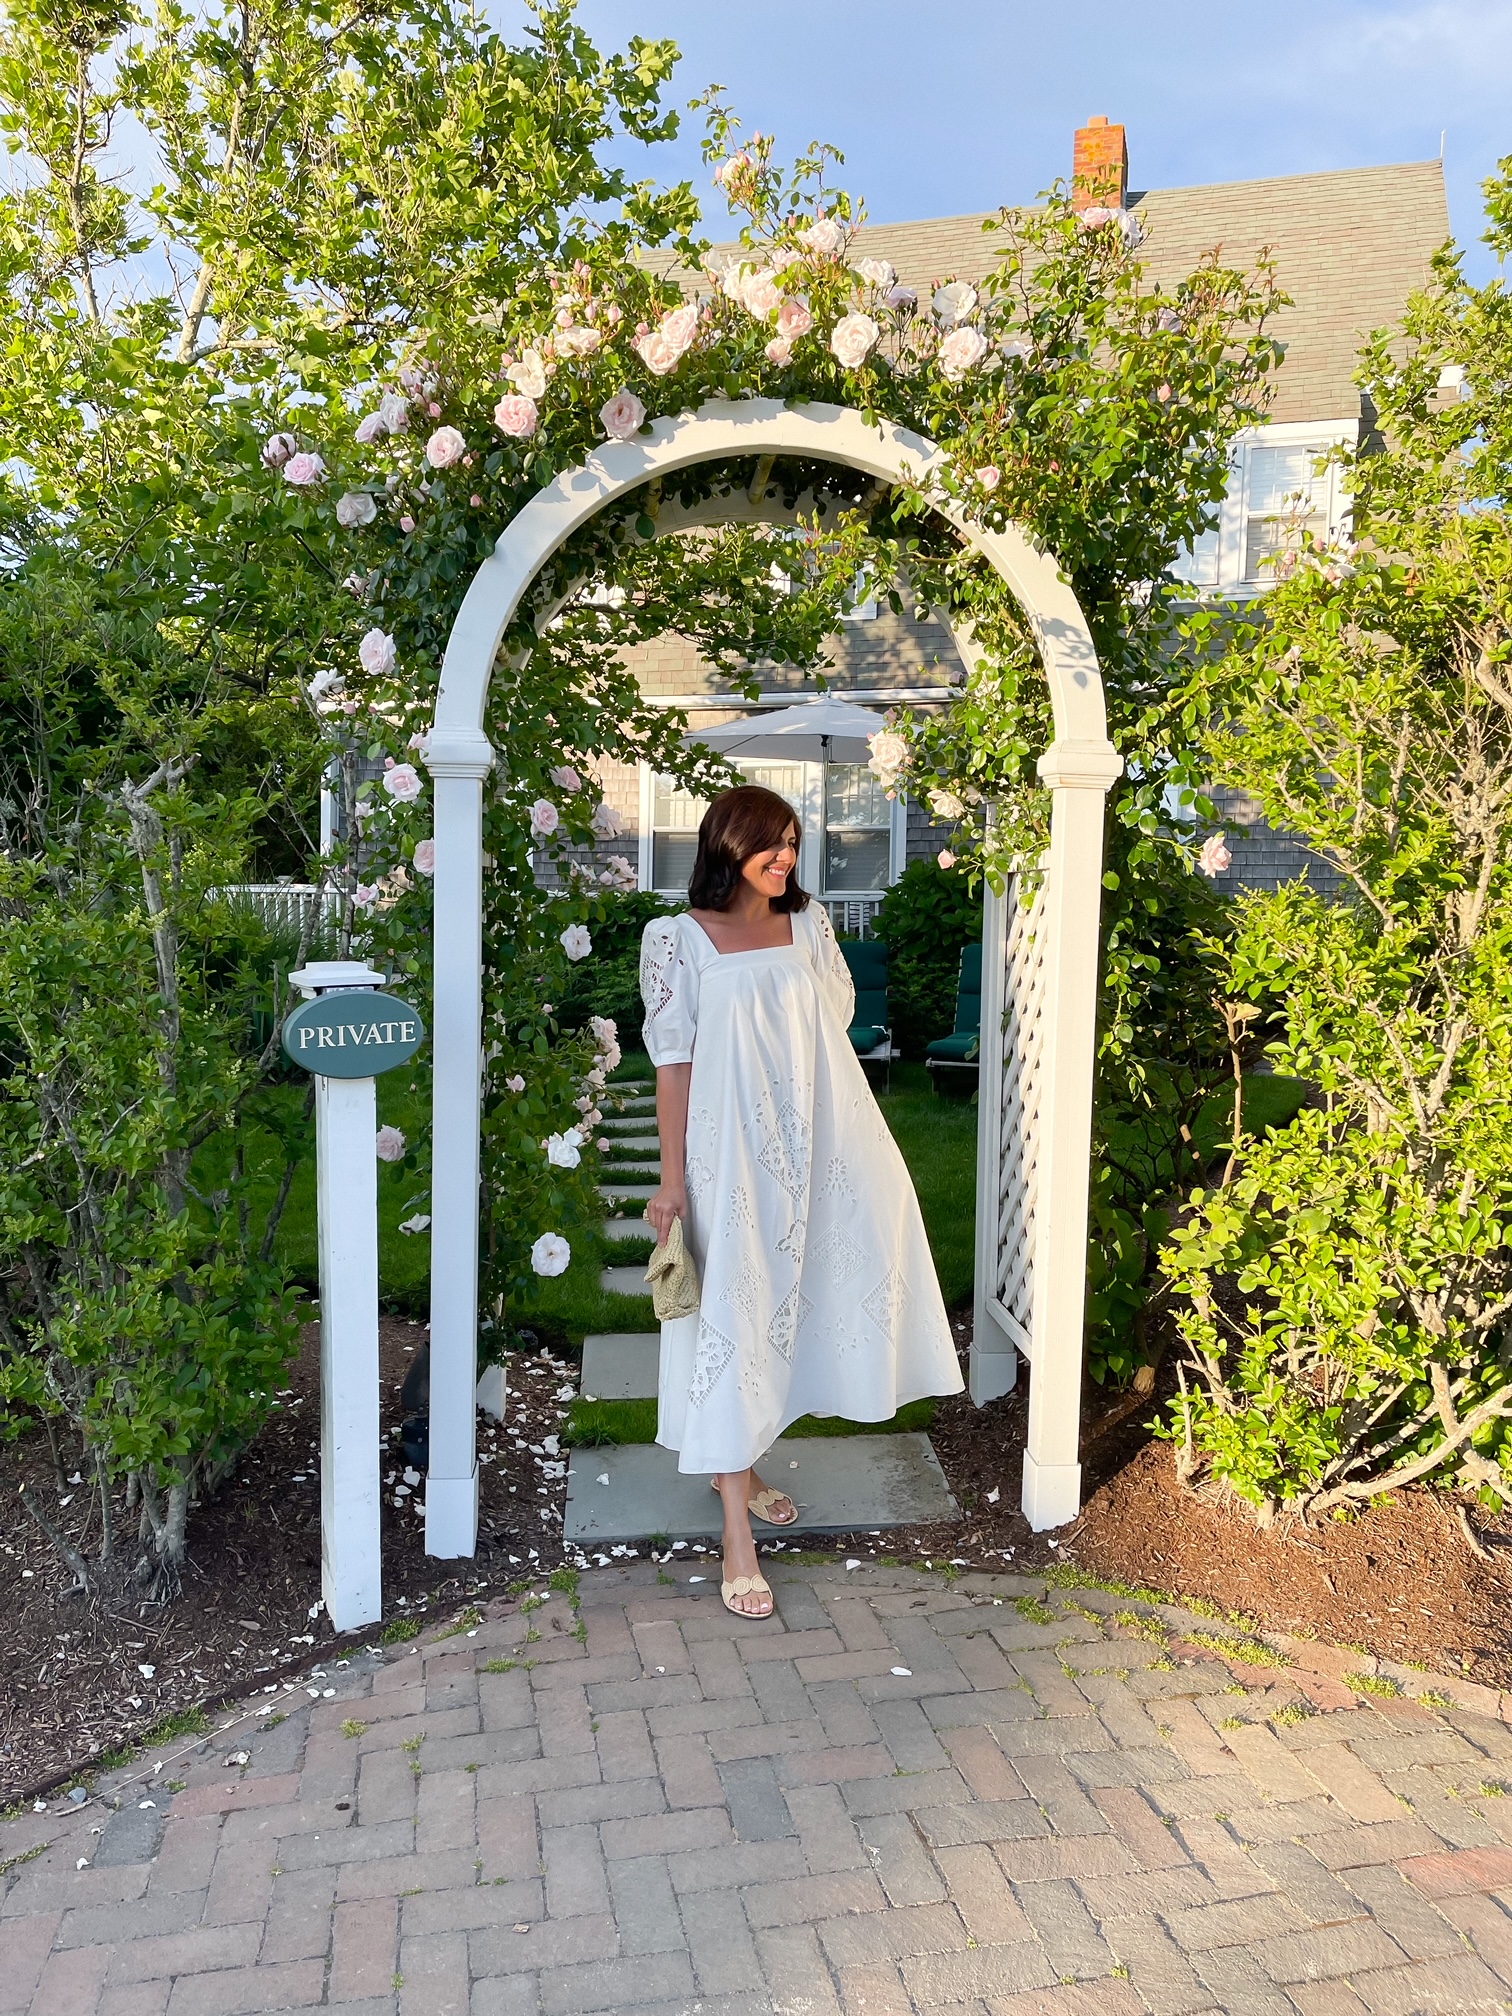 Desiree Leone of Beautifully Seaside features, Top 10 Must-Have Summer Dresses That Will Keep You Cool and Stylish.